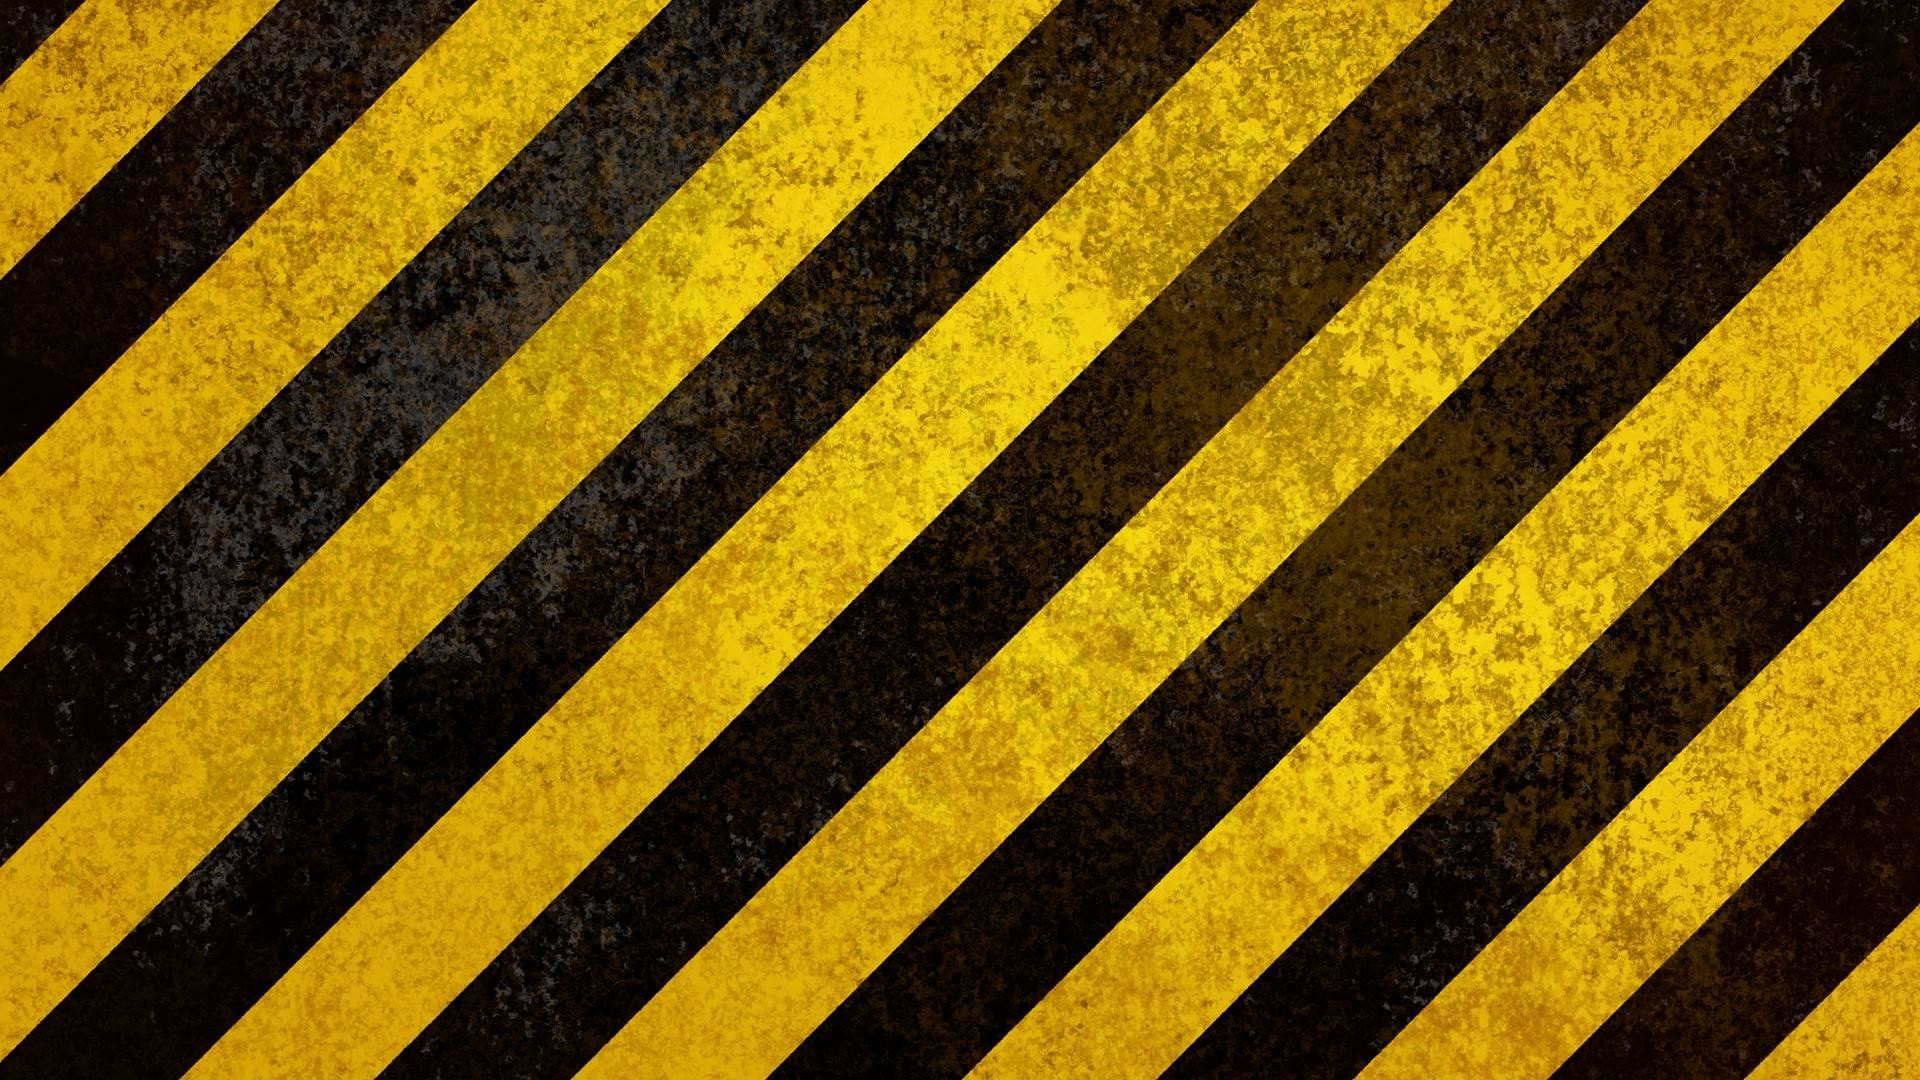 1920x1080 Hd-Yellow-grunge-textures-images-wallpapers